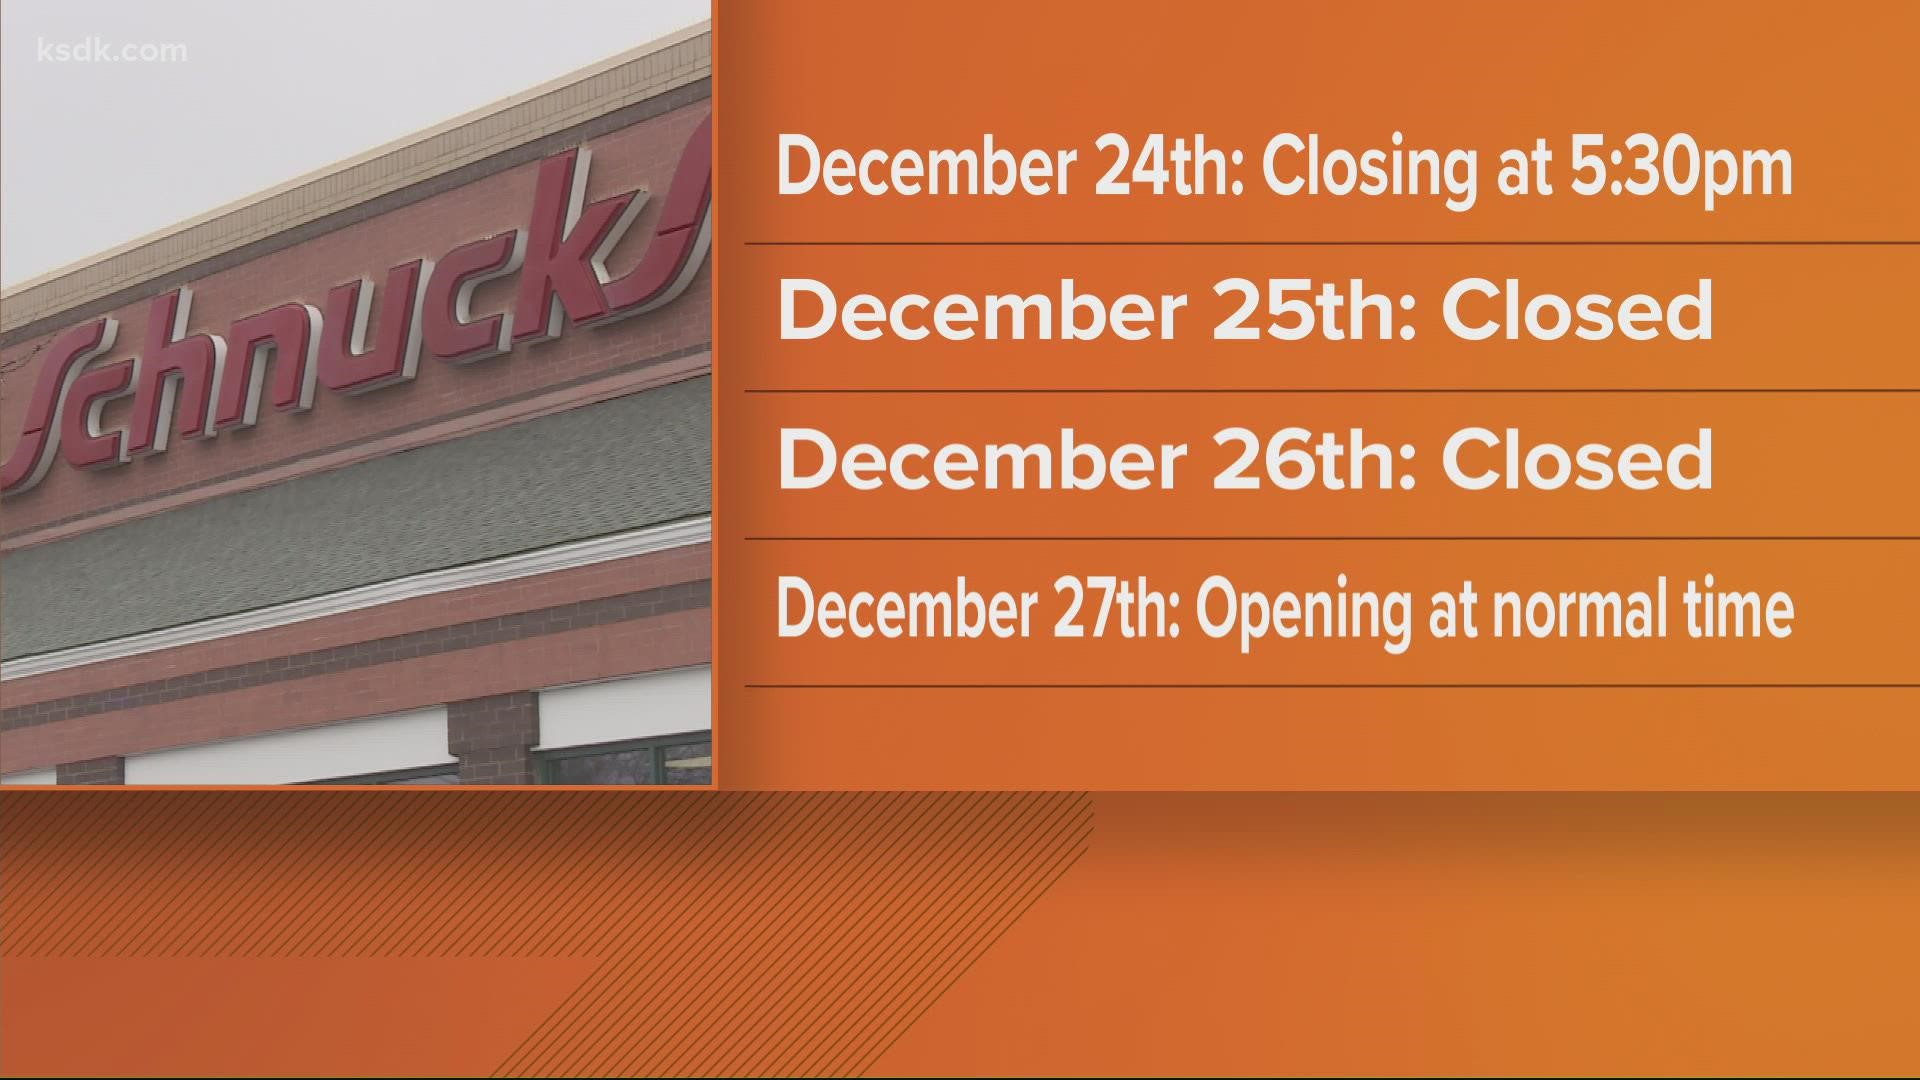 The St. Louis area grocery store chains said they wanted to give their workers an extended Christmas holiday break to spend more time with their families.